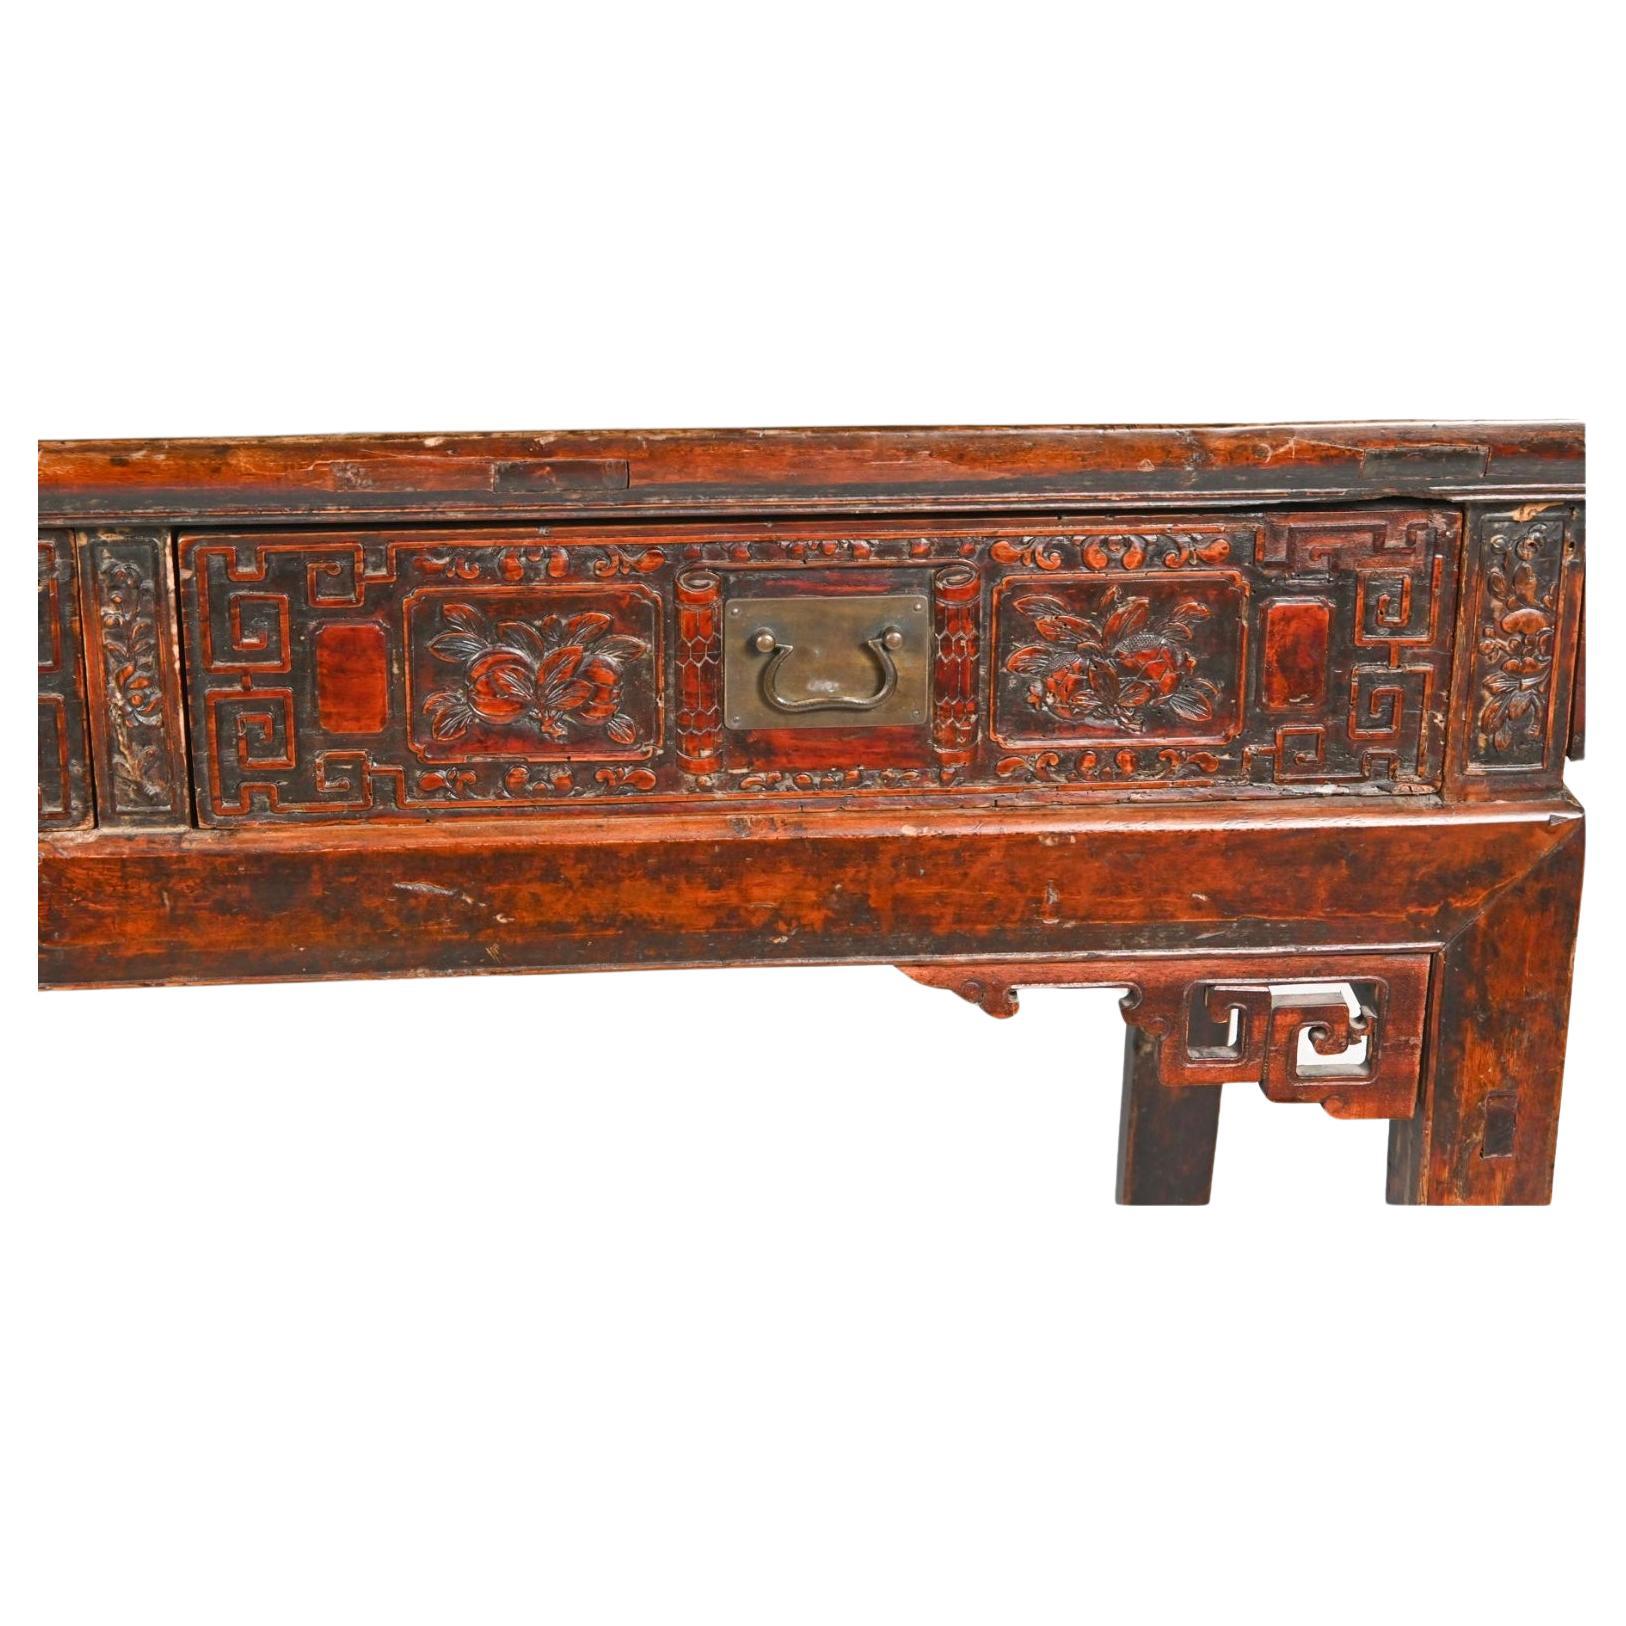 19th Century Antique Chinese Carved Altar Table / Desk For Sale